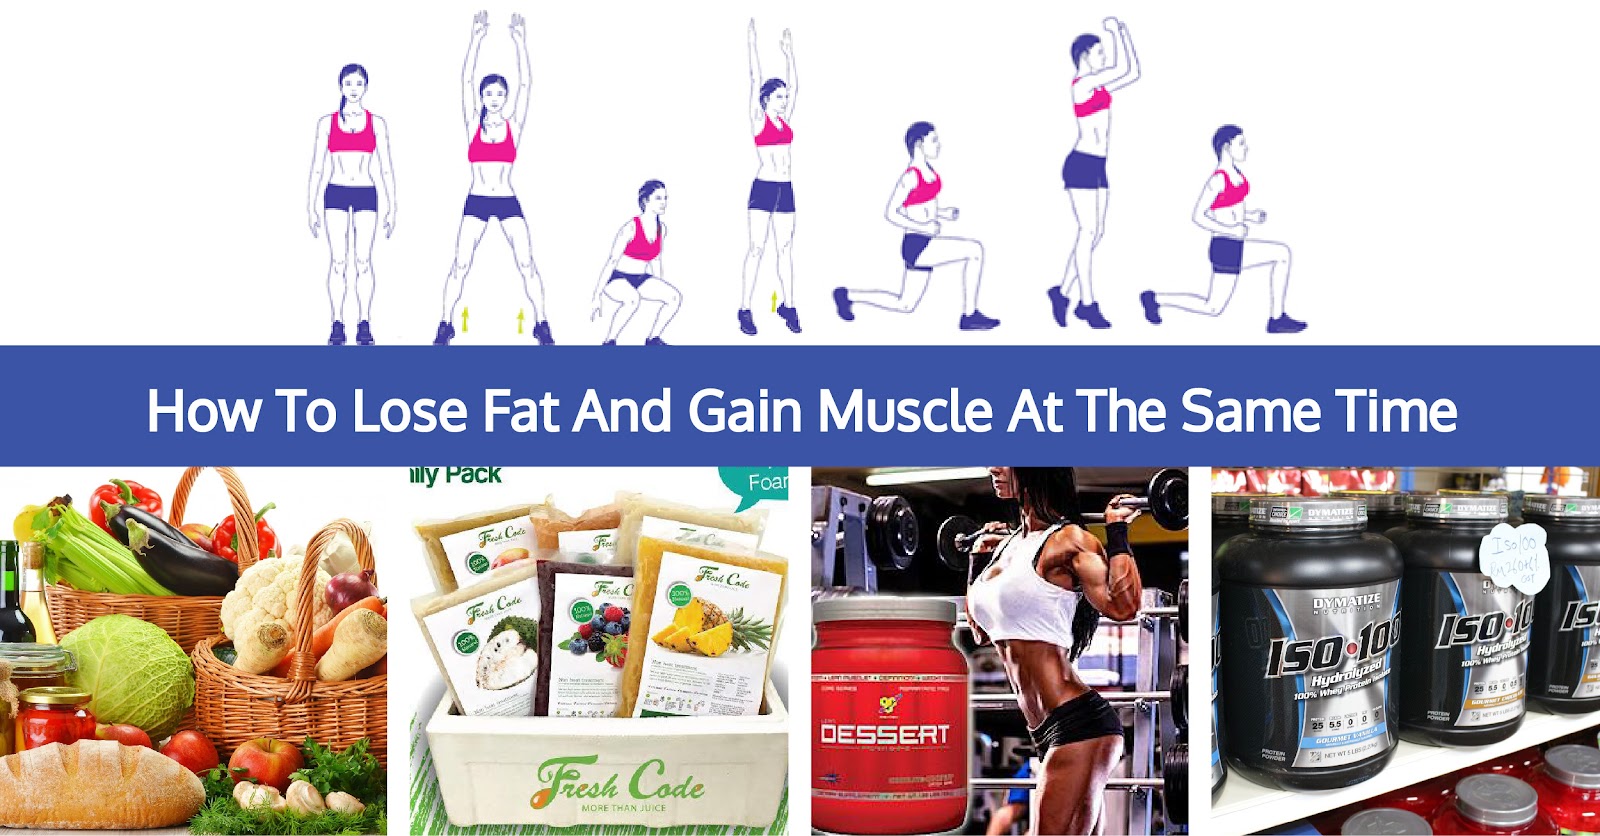 how to lose fat gain muscle same time